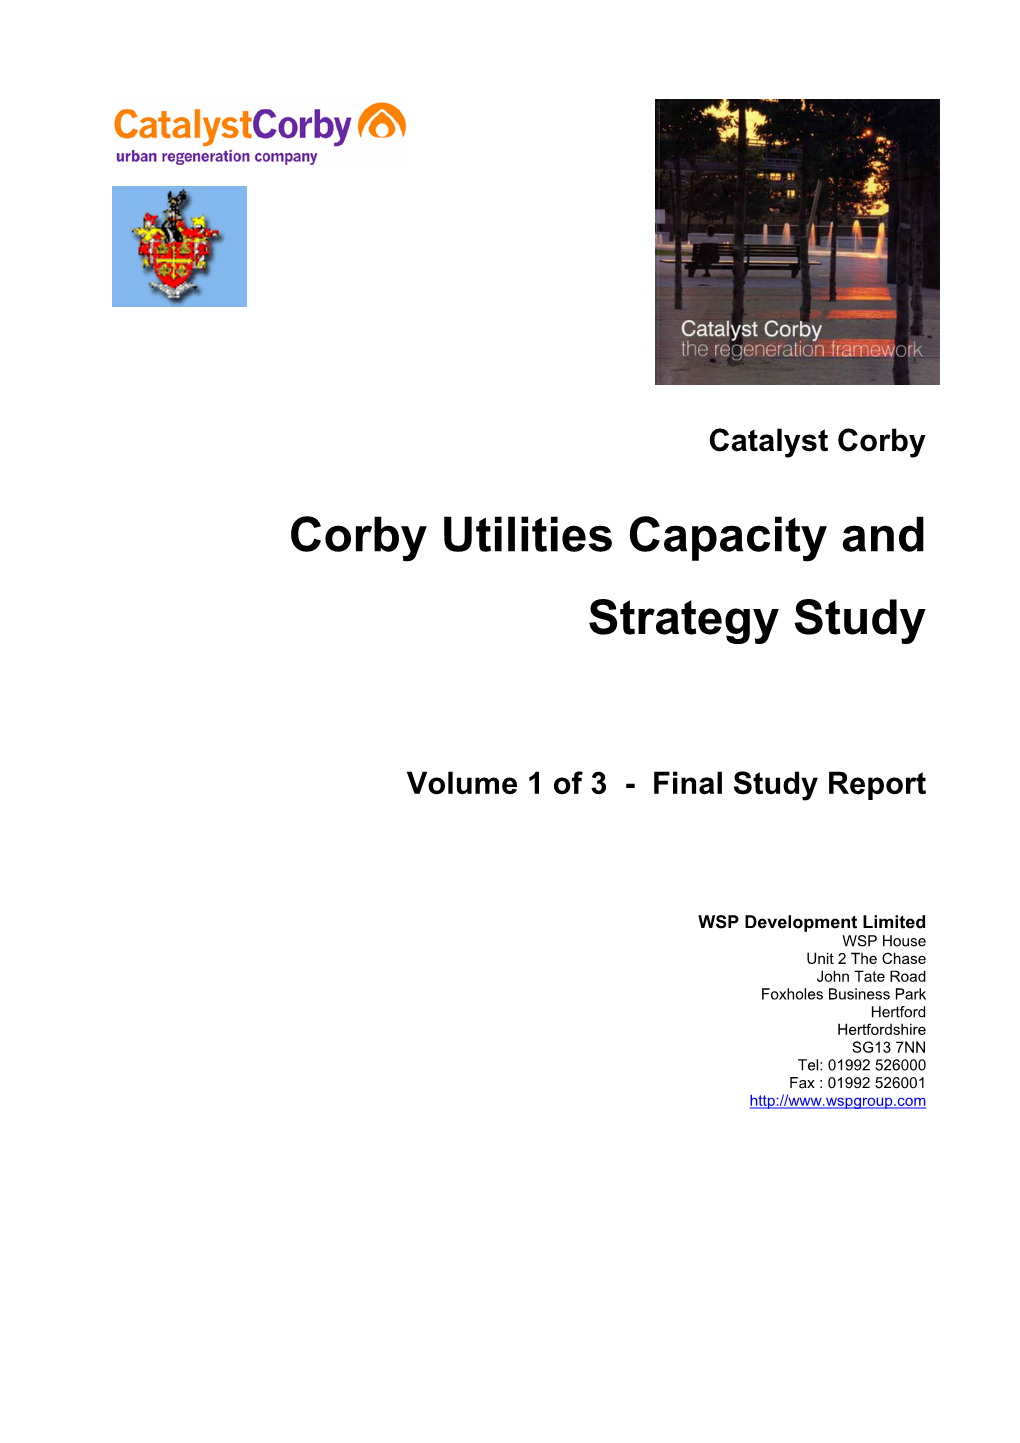 Corby Utilities Capacity and Strategy Study